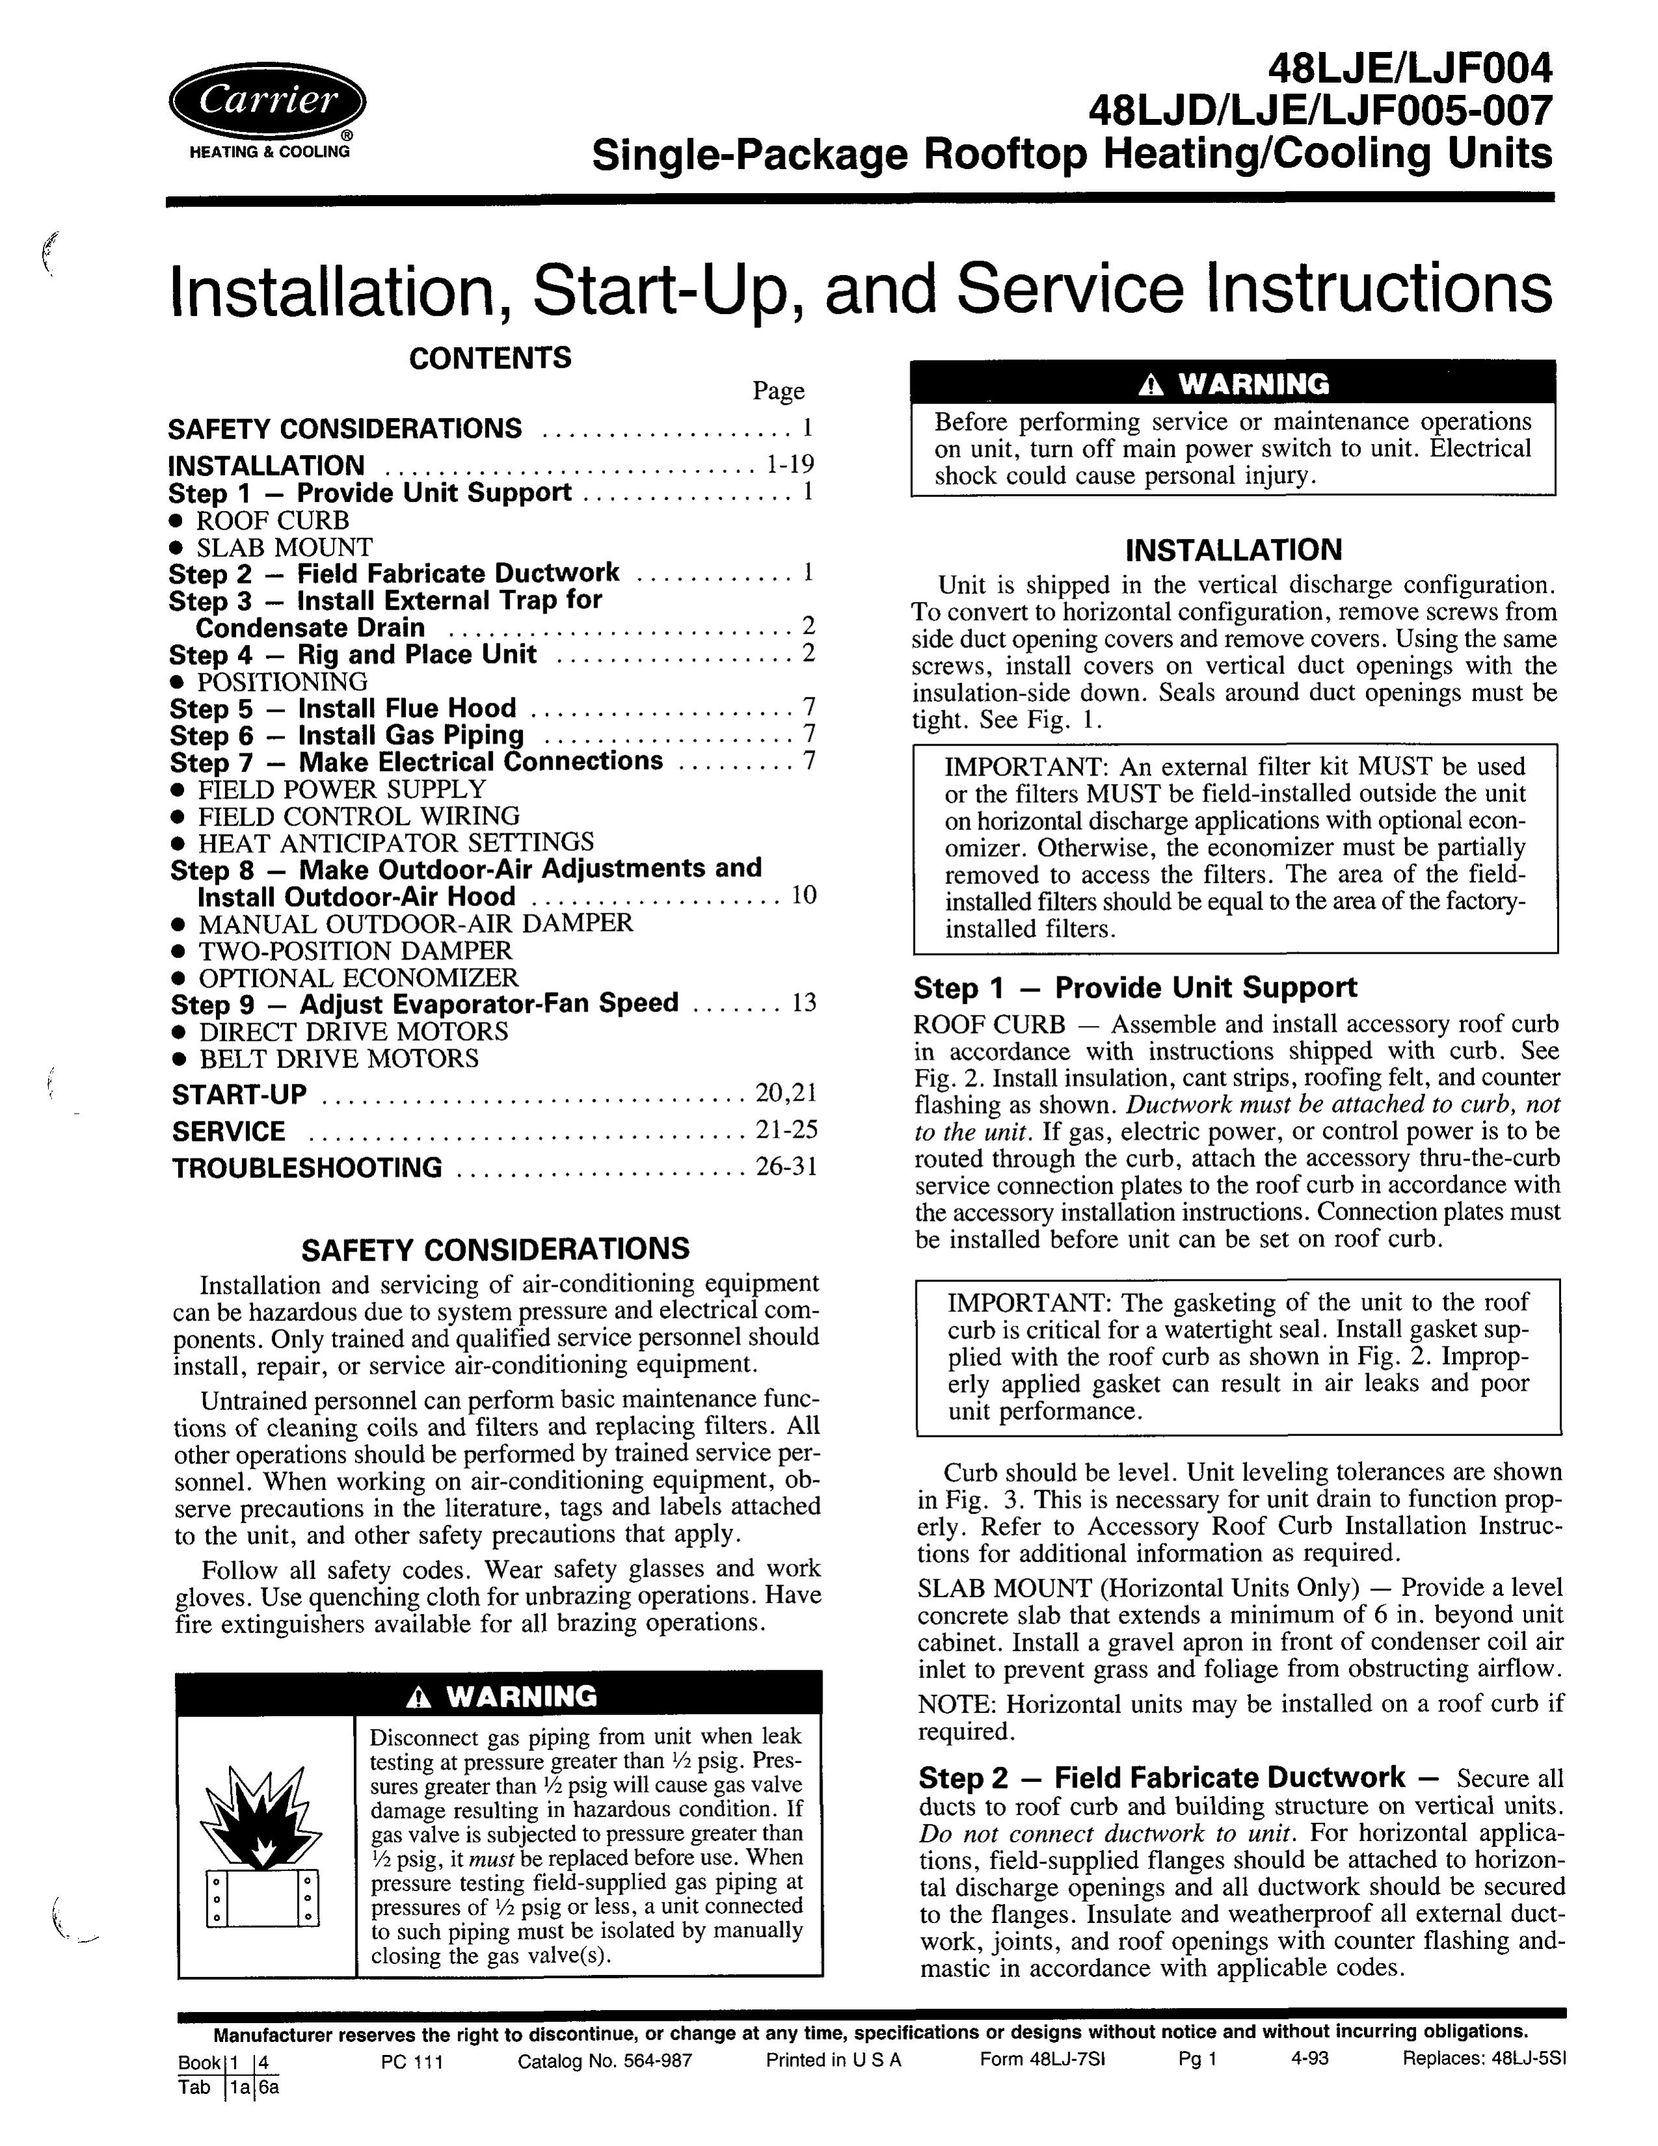 Carrier 48LJD Heating System User Manual